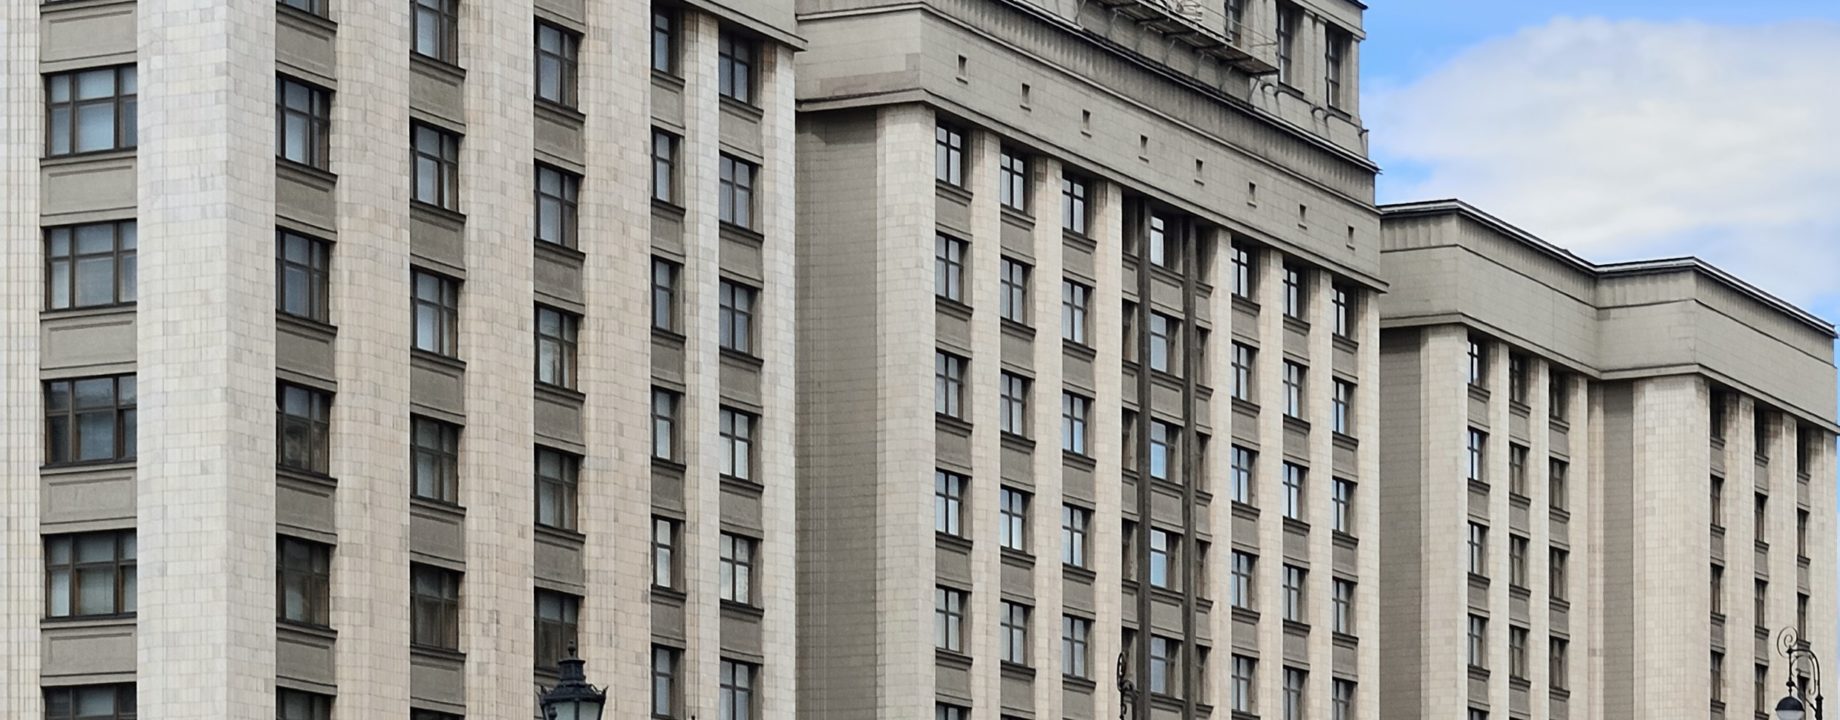 Building of Council of Labor and Defense Moscow Dmitry Ivanov Own work